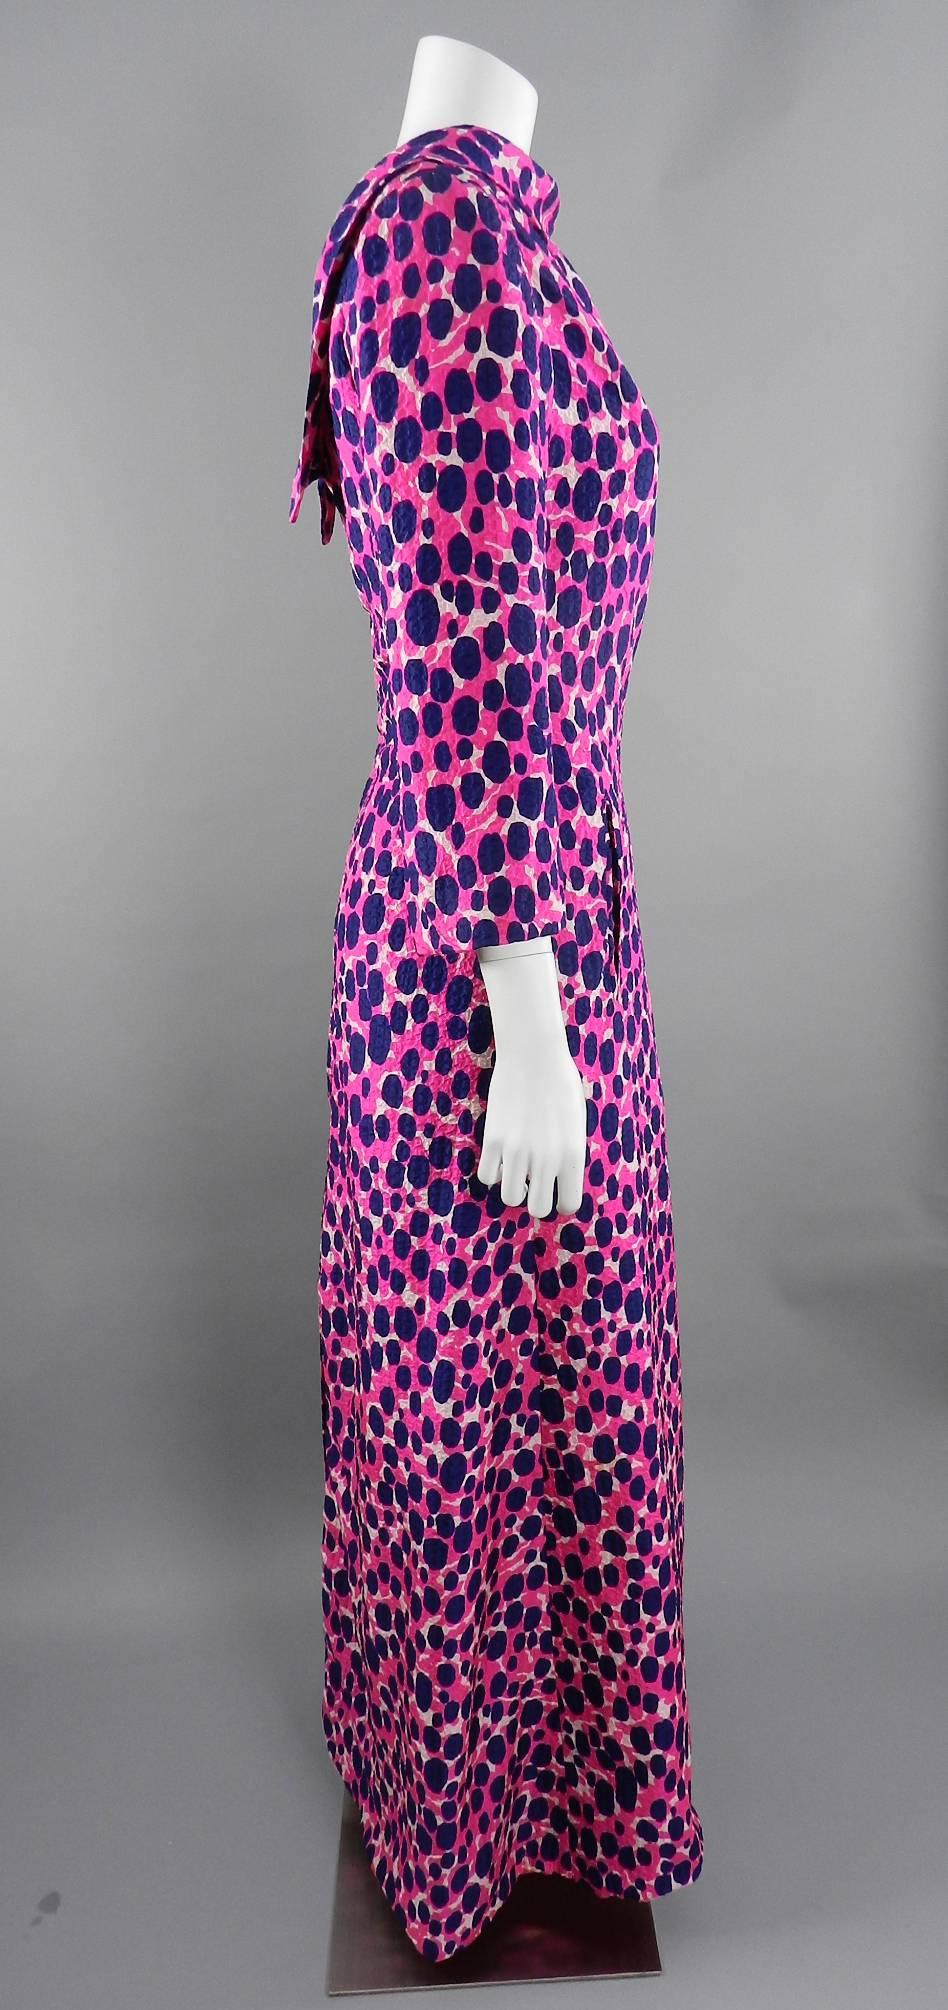 Vintage 1970’s Givenchy Haute Couture silk dress with graphic hot fuchsia pink and navy pattern.  Lined with hot pink silk fabric. Label is numbered. Approximately a modern USA 8 / 10. Garment measures 38” at bust and is recommended for a 36” bust